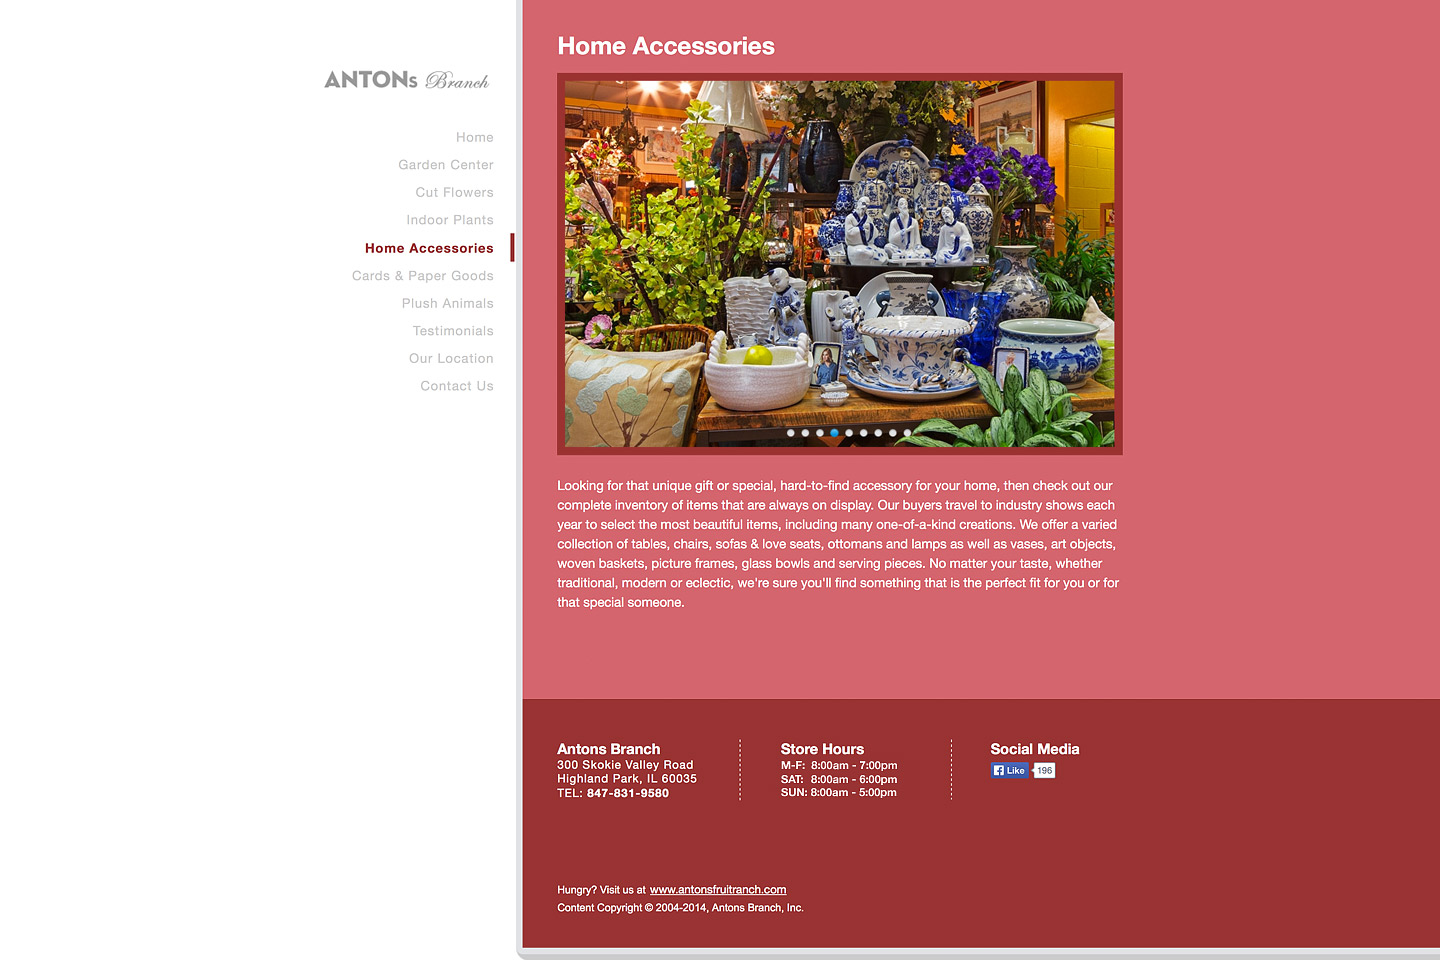 a screen capture of the home accessories page, featuring a beautiful arrangement of home accessories for sale in the antons branch showroom